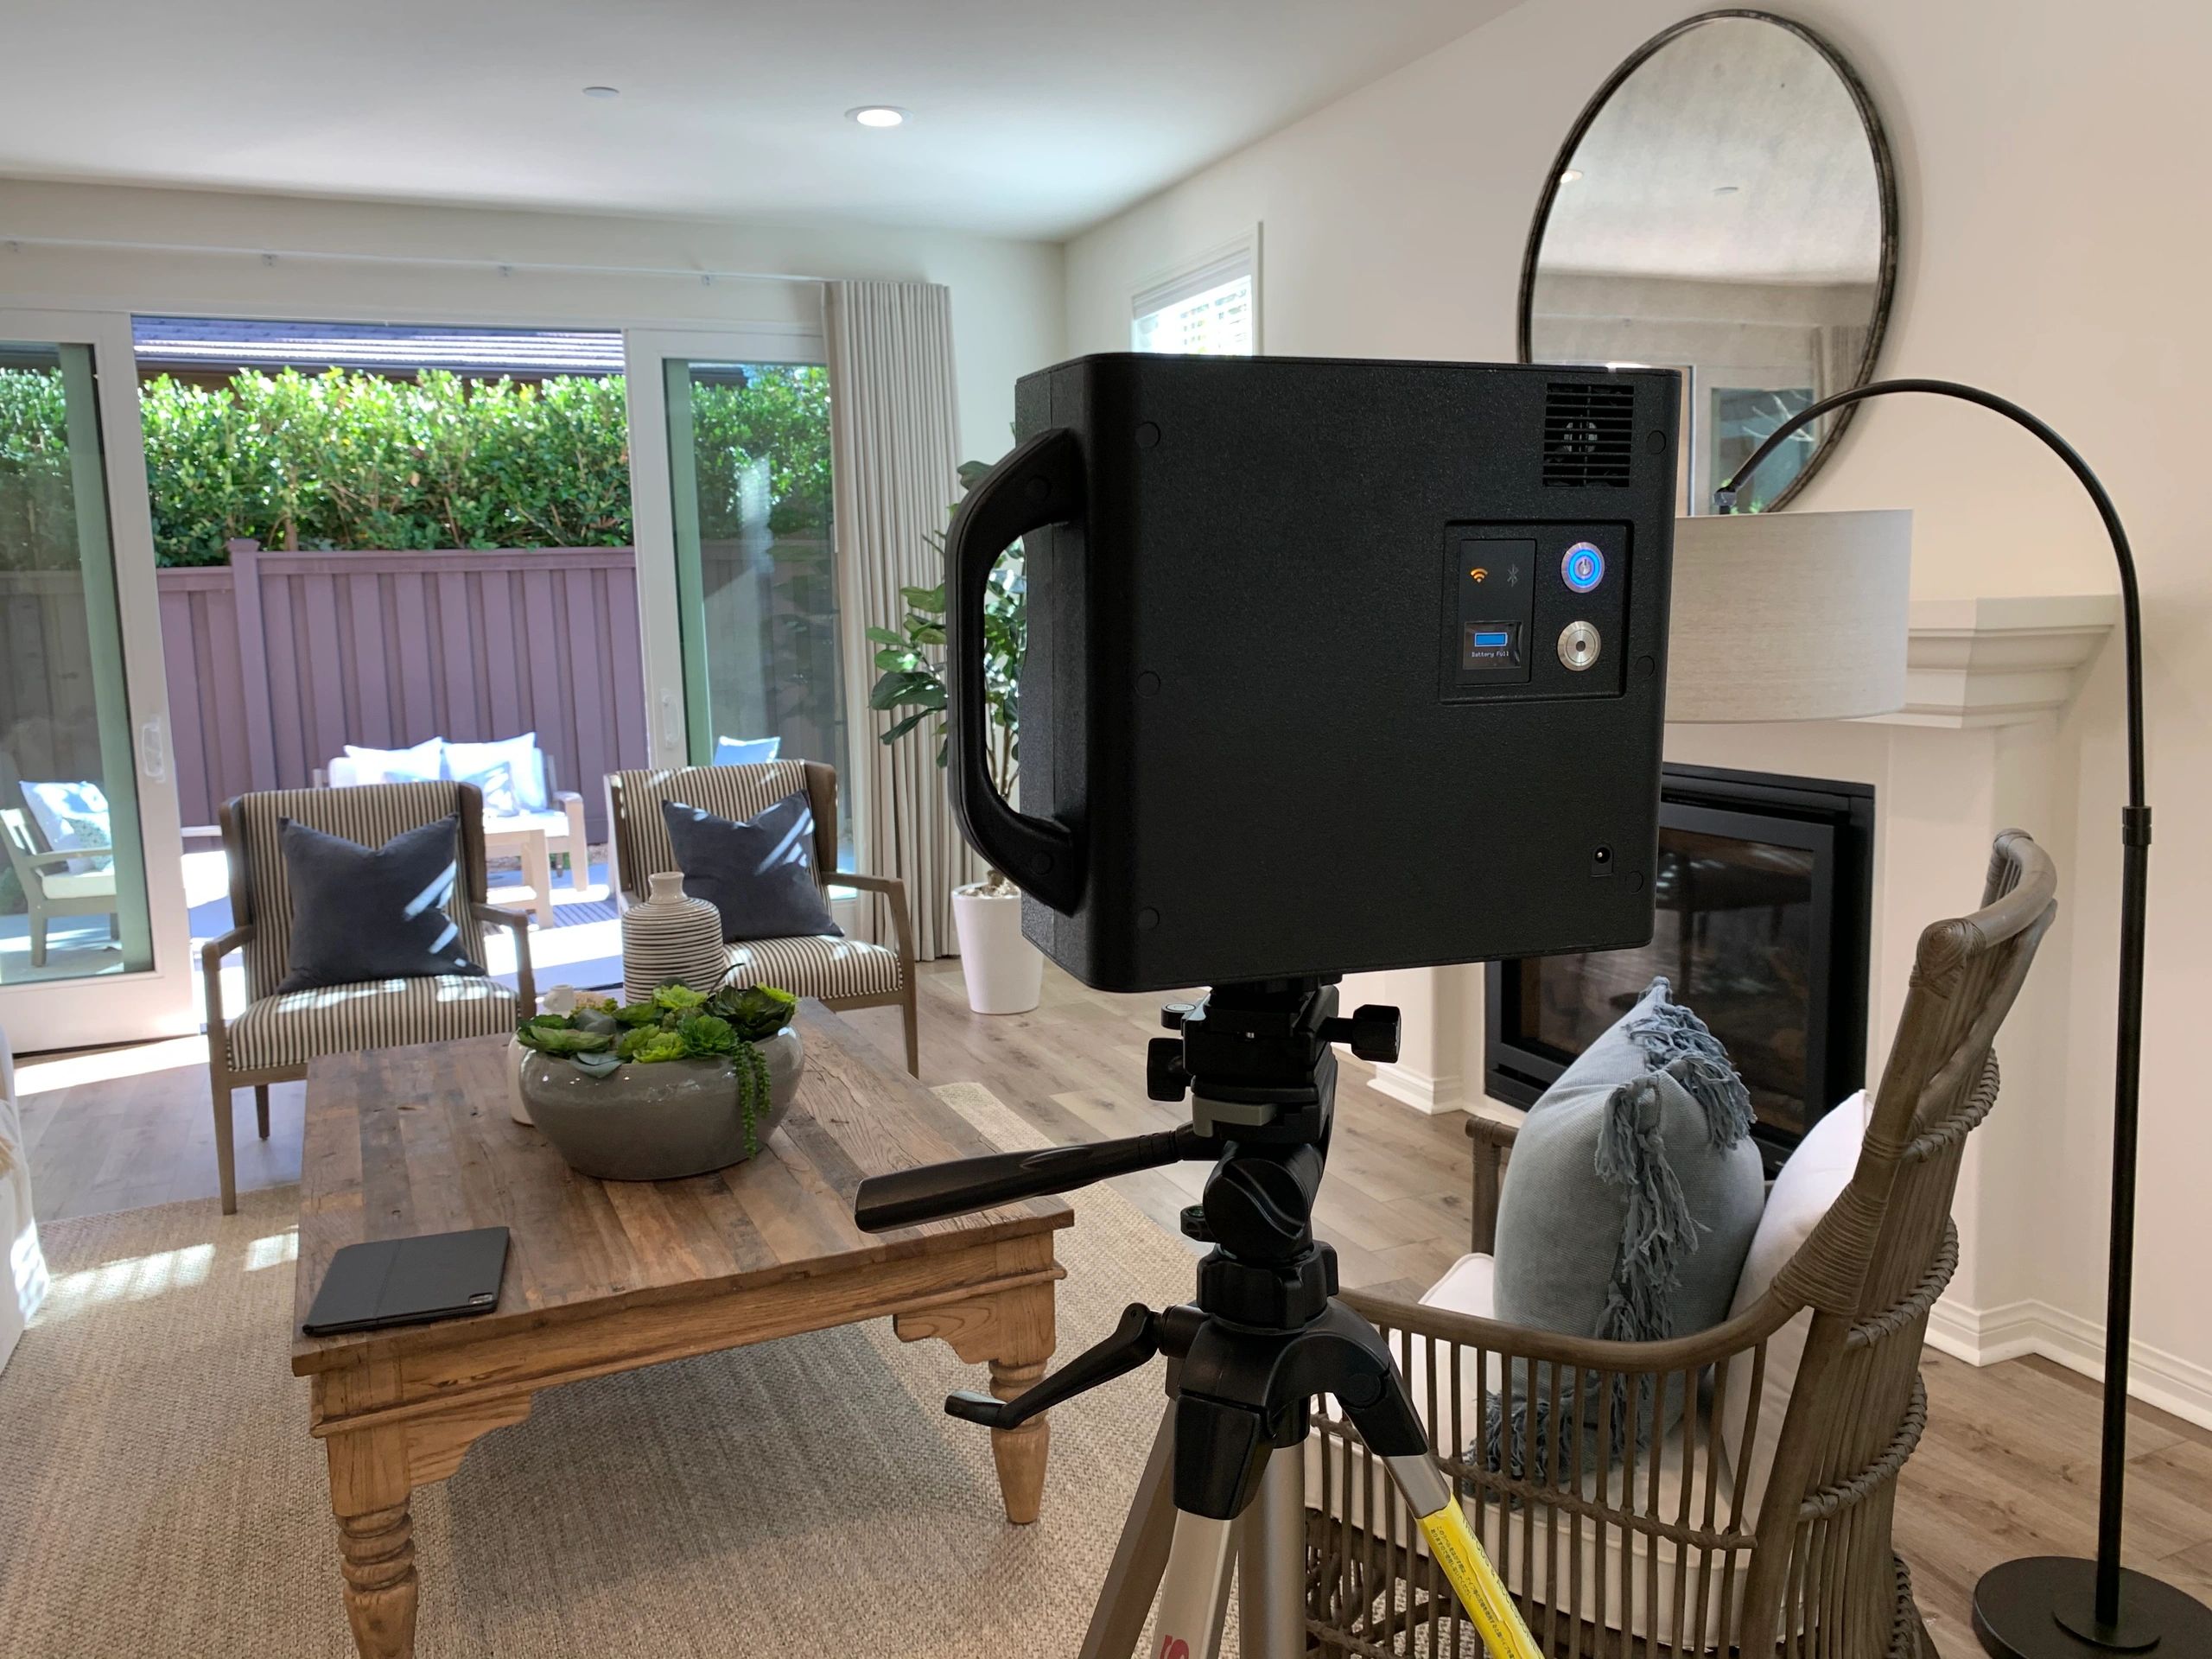 The Matterport camera on a tripod in a living room of a house.